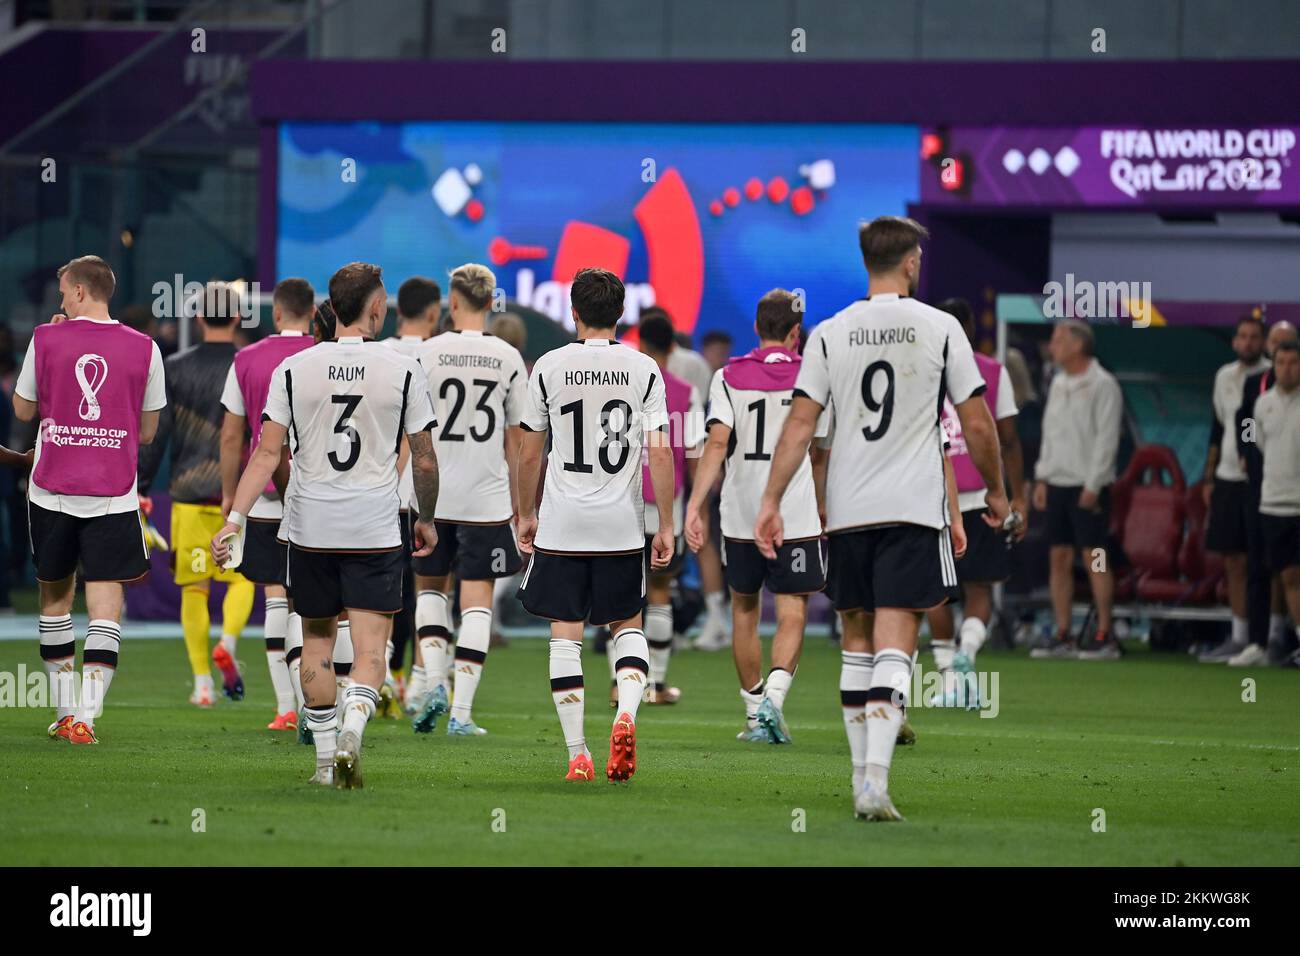 Departure of the German players, team photo, team, team, team photo. Germany (GER) - Japan (JPN) 1-2 Group Stage Group E on 23.11.2022 at Khalifa International Stadium. Soccer World Cup 2022 in Qatar from 20.11. - 18.12.2022 ? Stock Photo